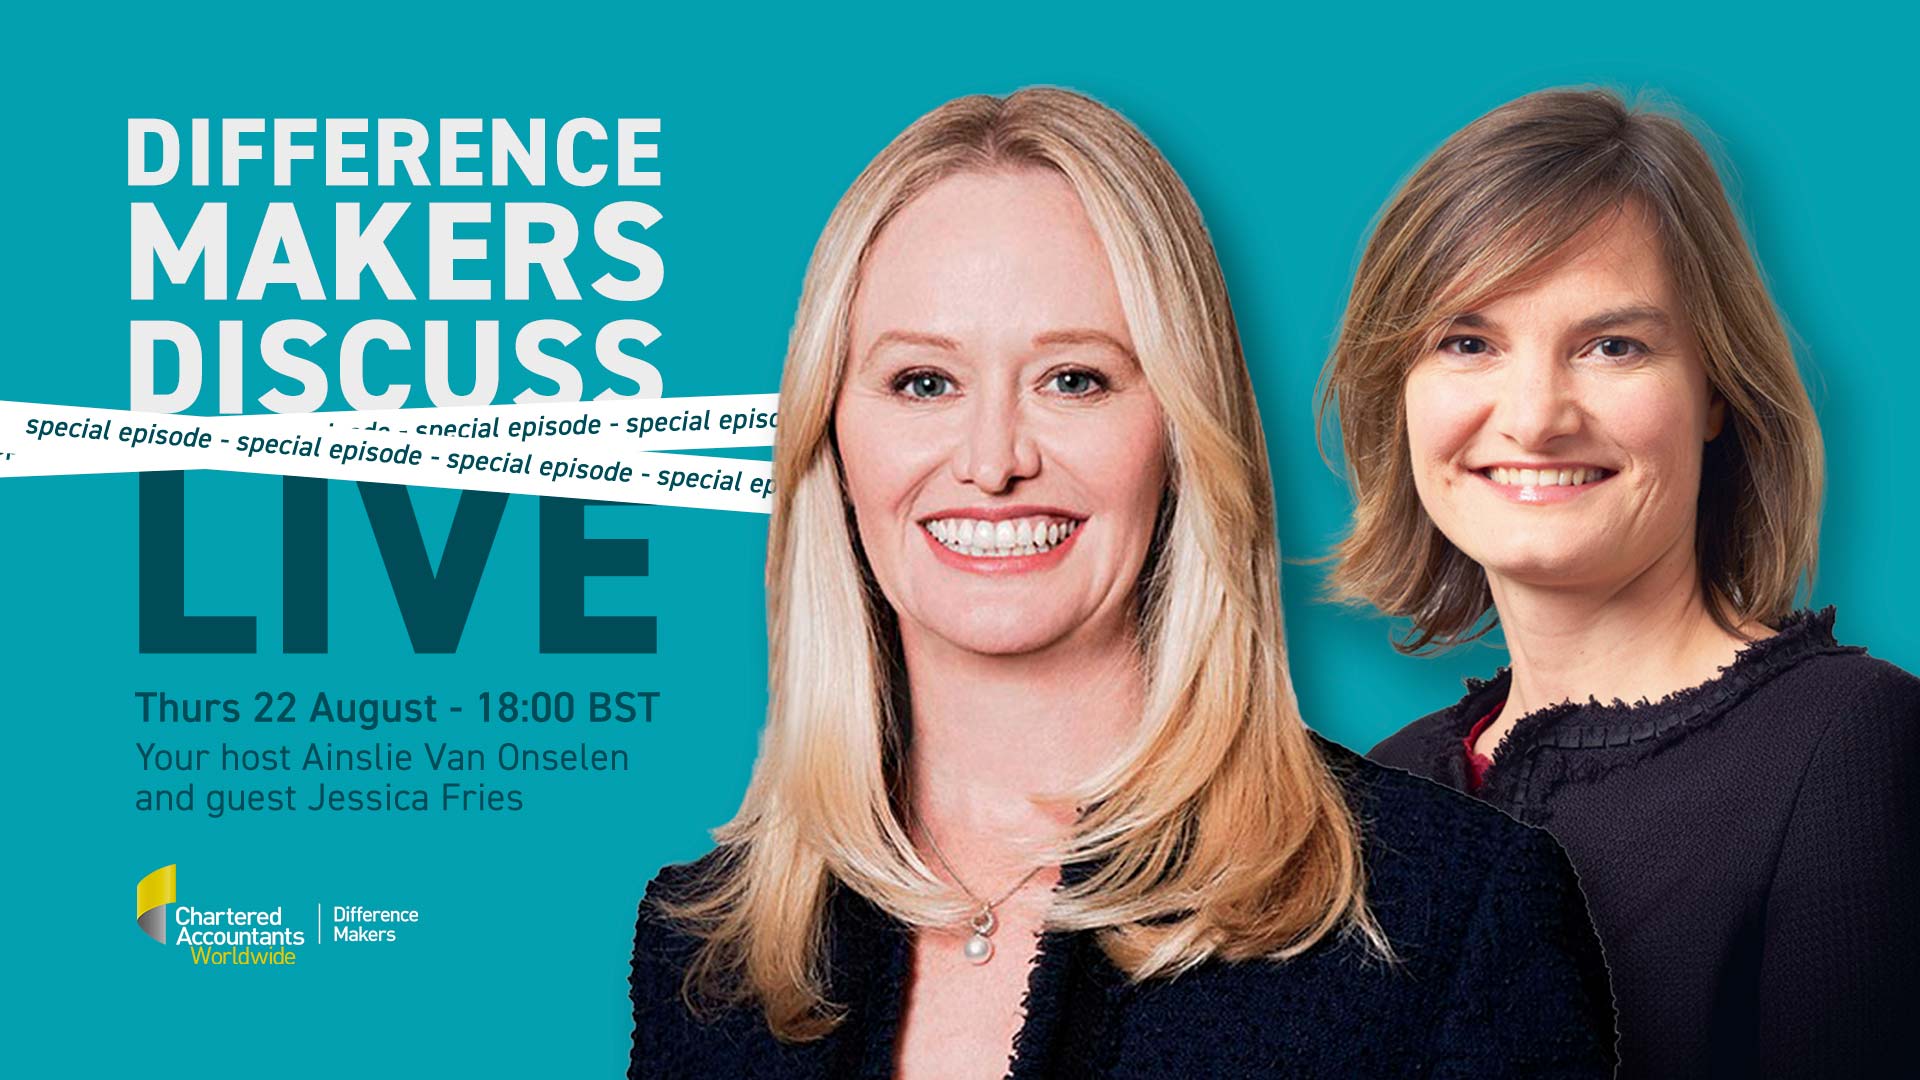 special edition of Difference Makers Discuss Live, hosted by Ainslie van Onselen